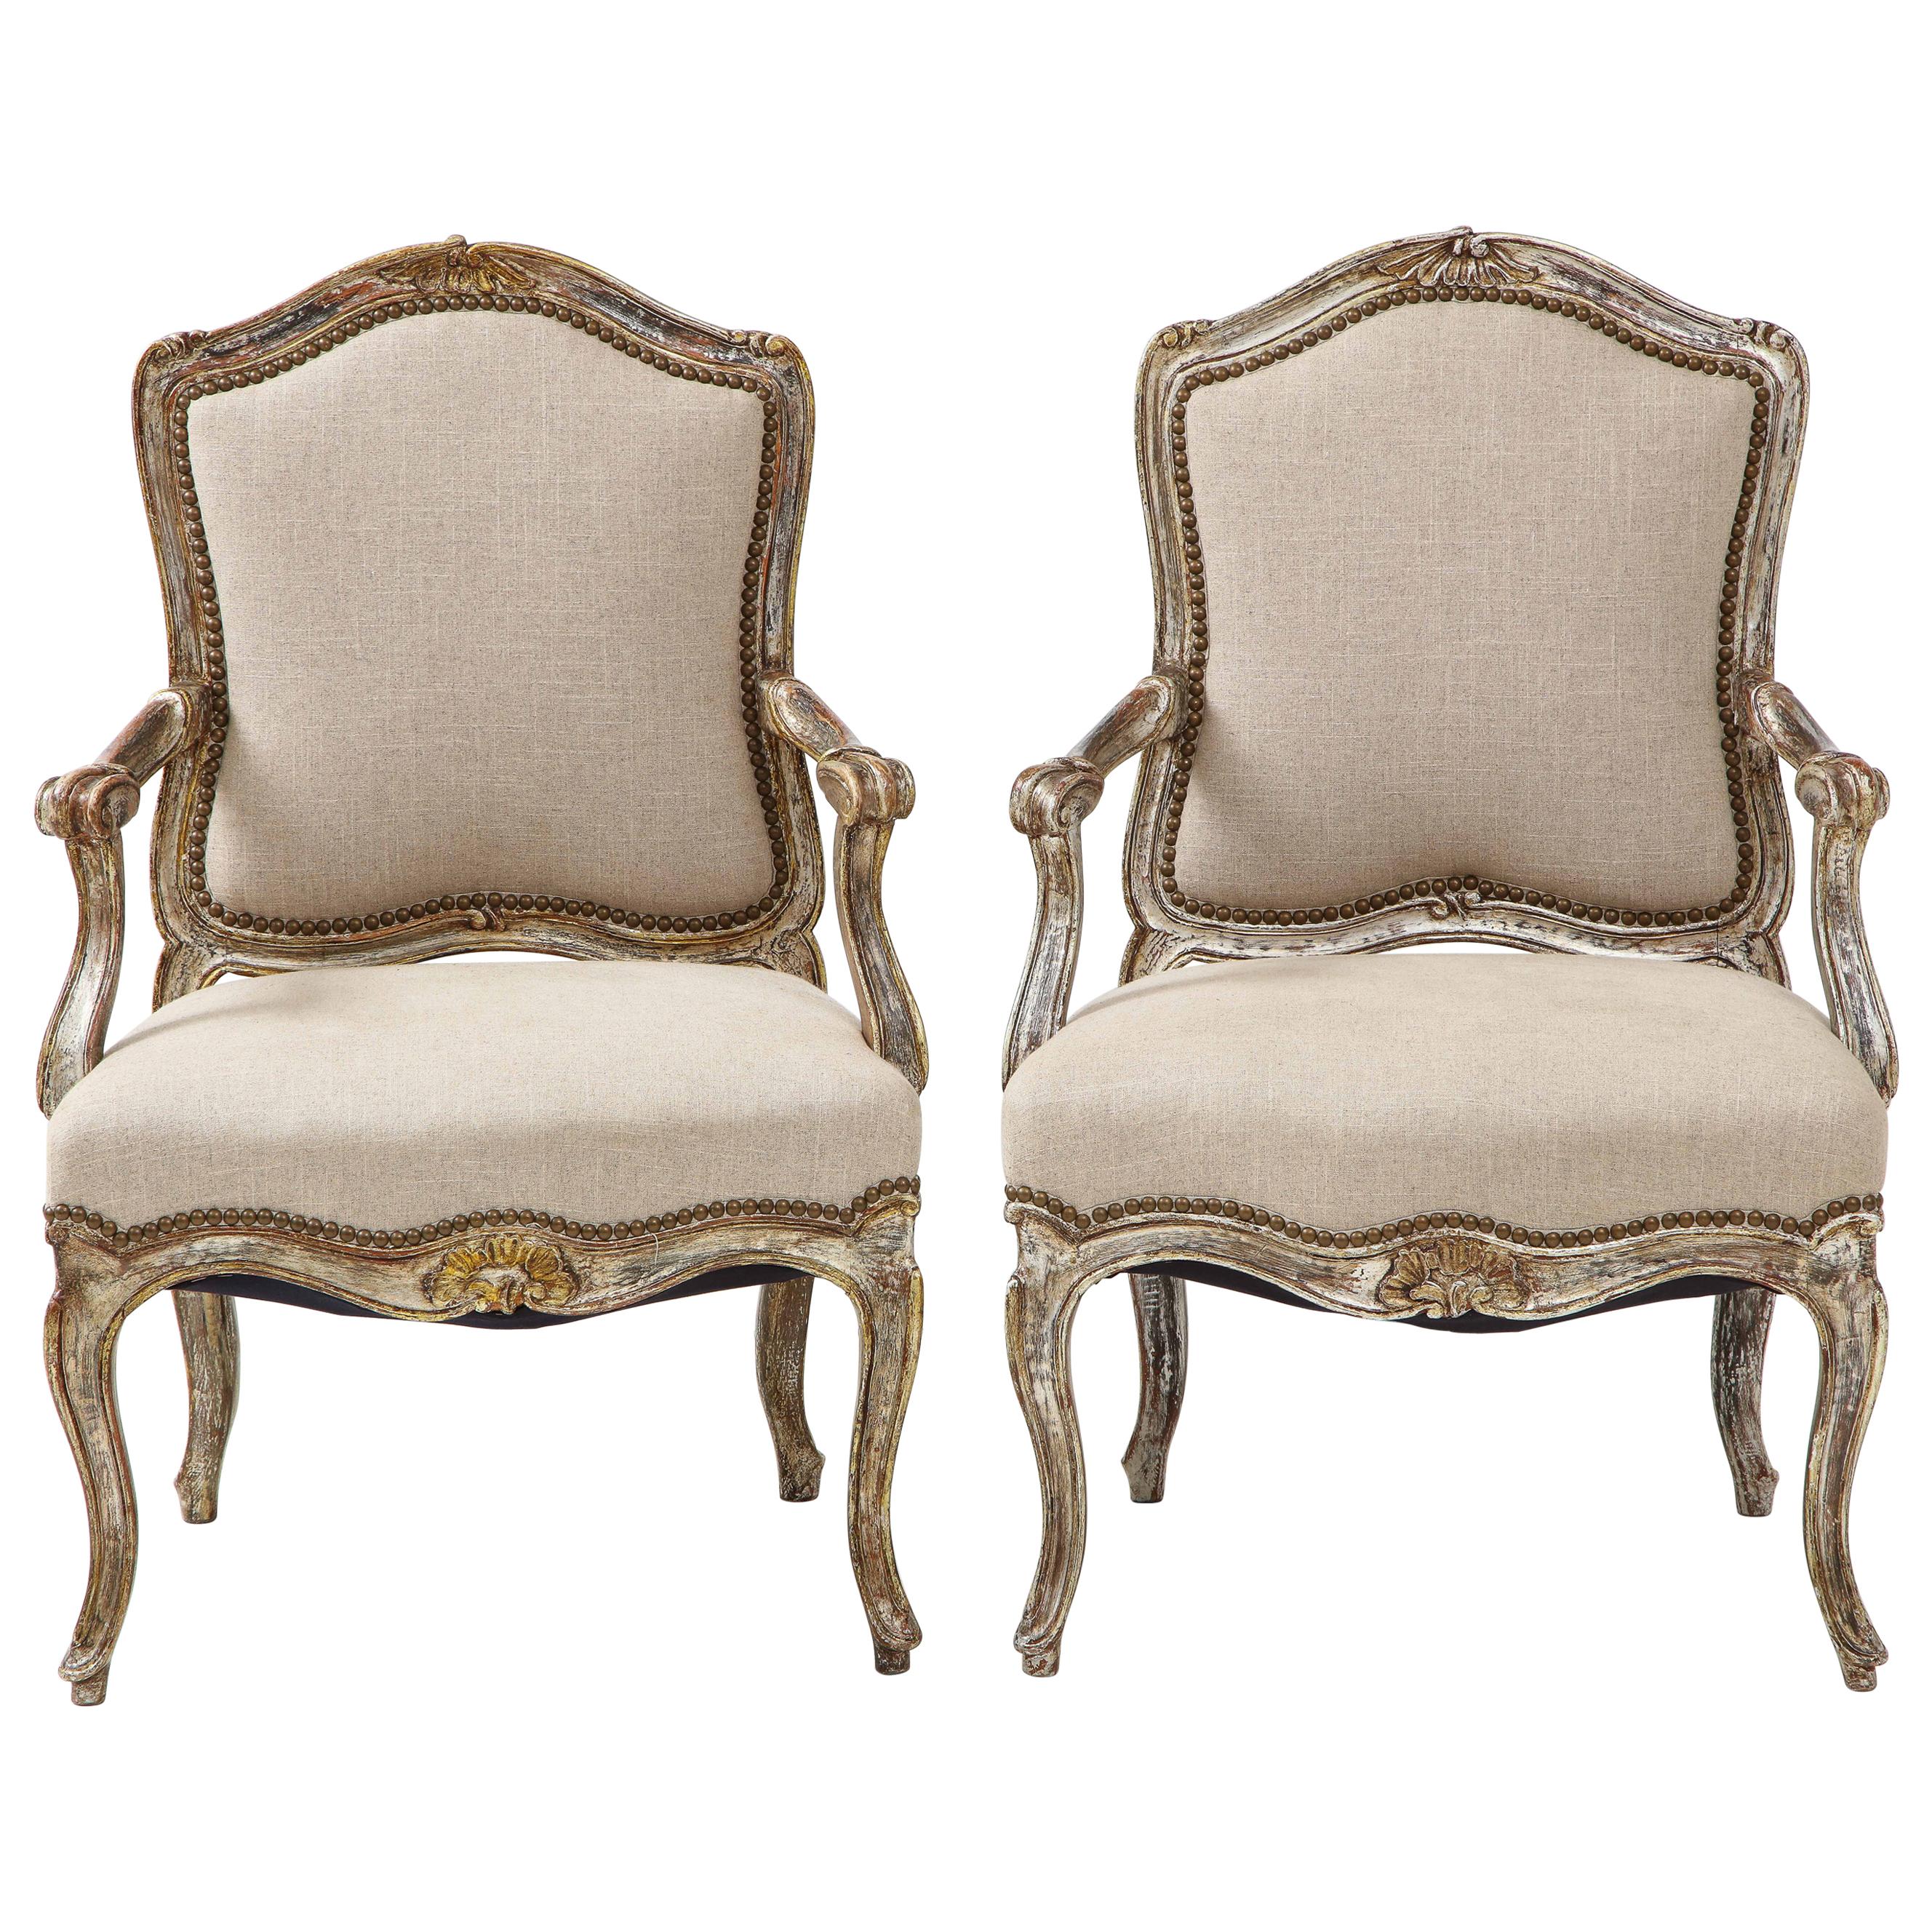 Pair of Italian Silver and Gilt Chairs